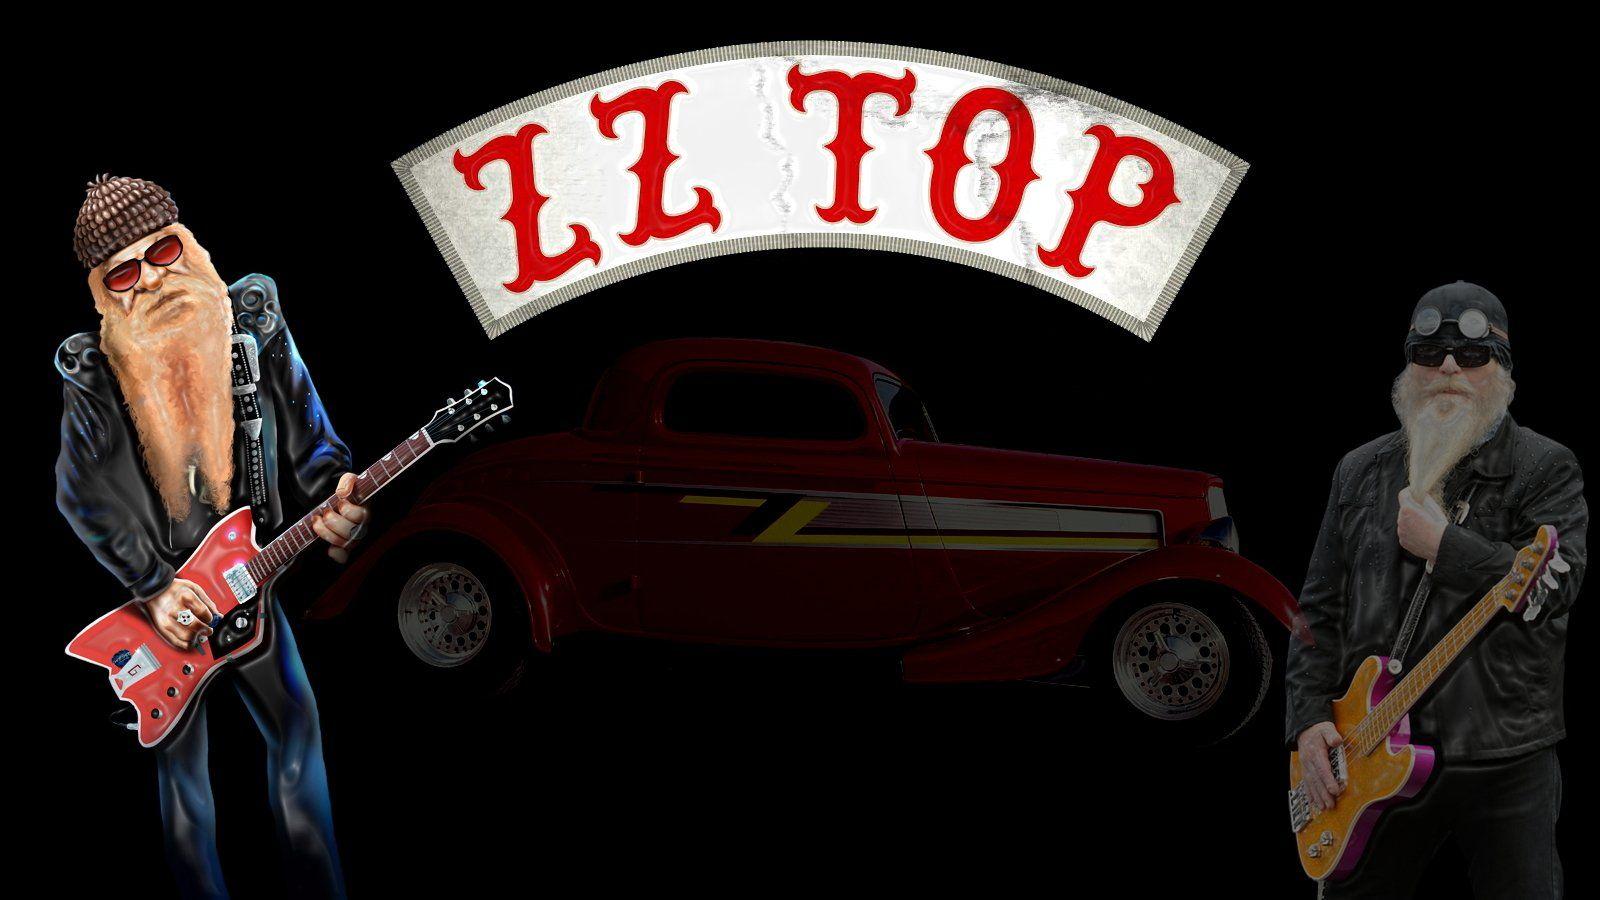 ZZ Top Wallpaper and Background Imagex900